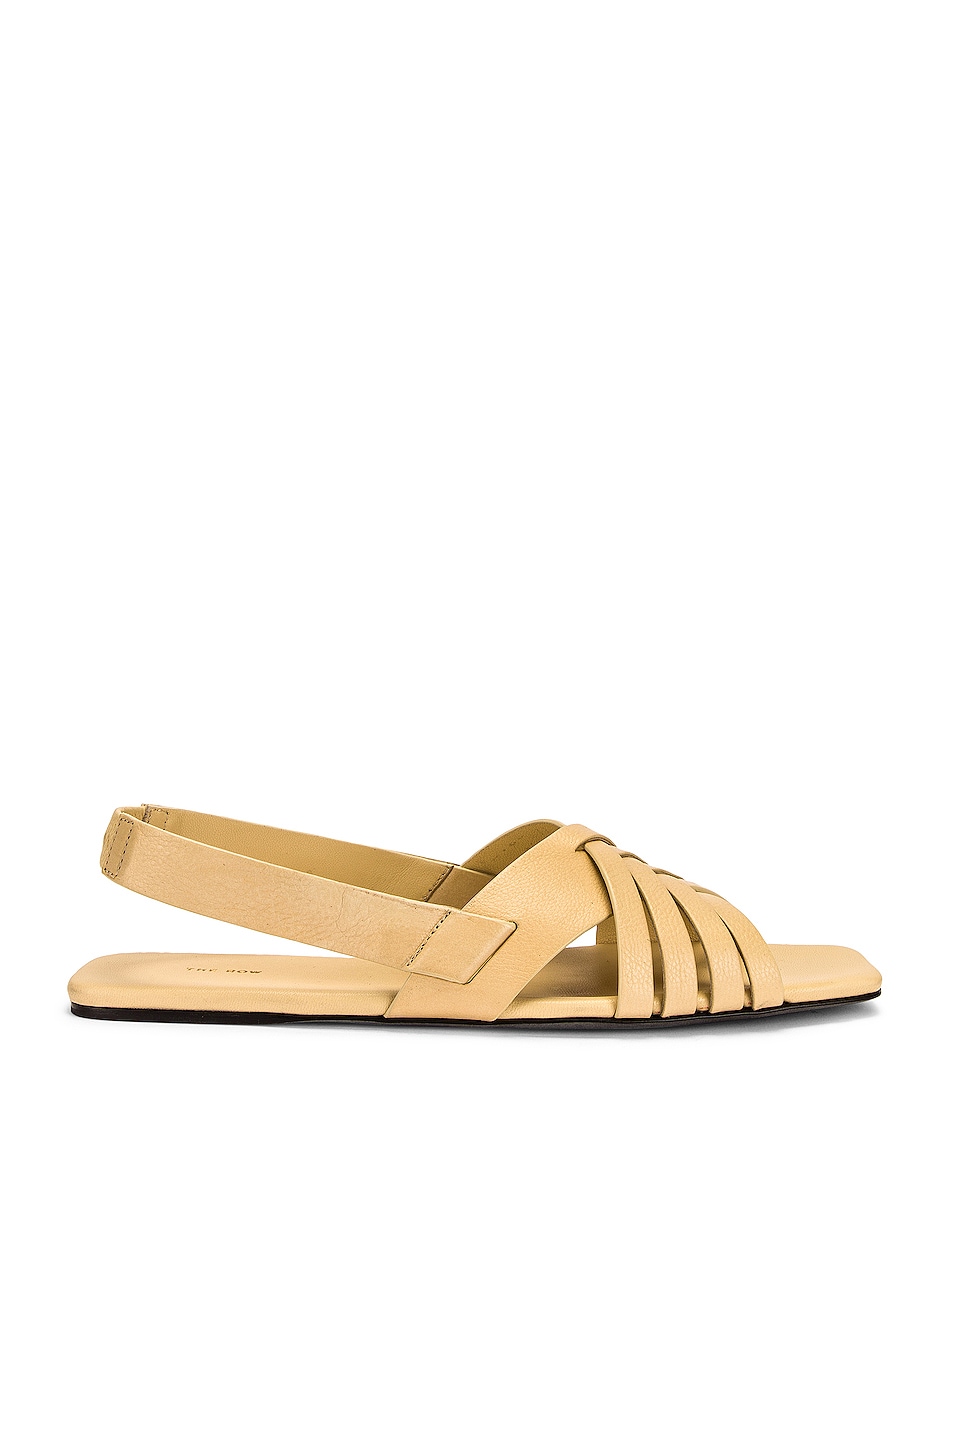 Image 1 of The Row Meera Sandals in Straw